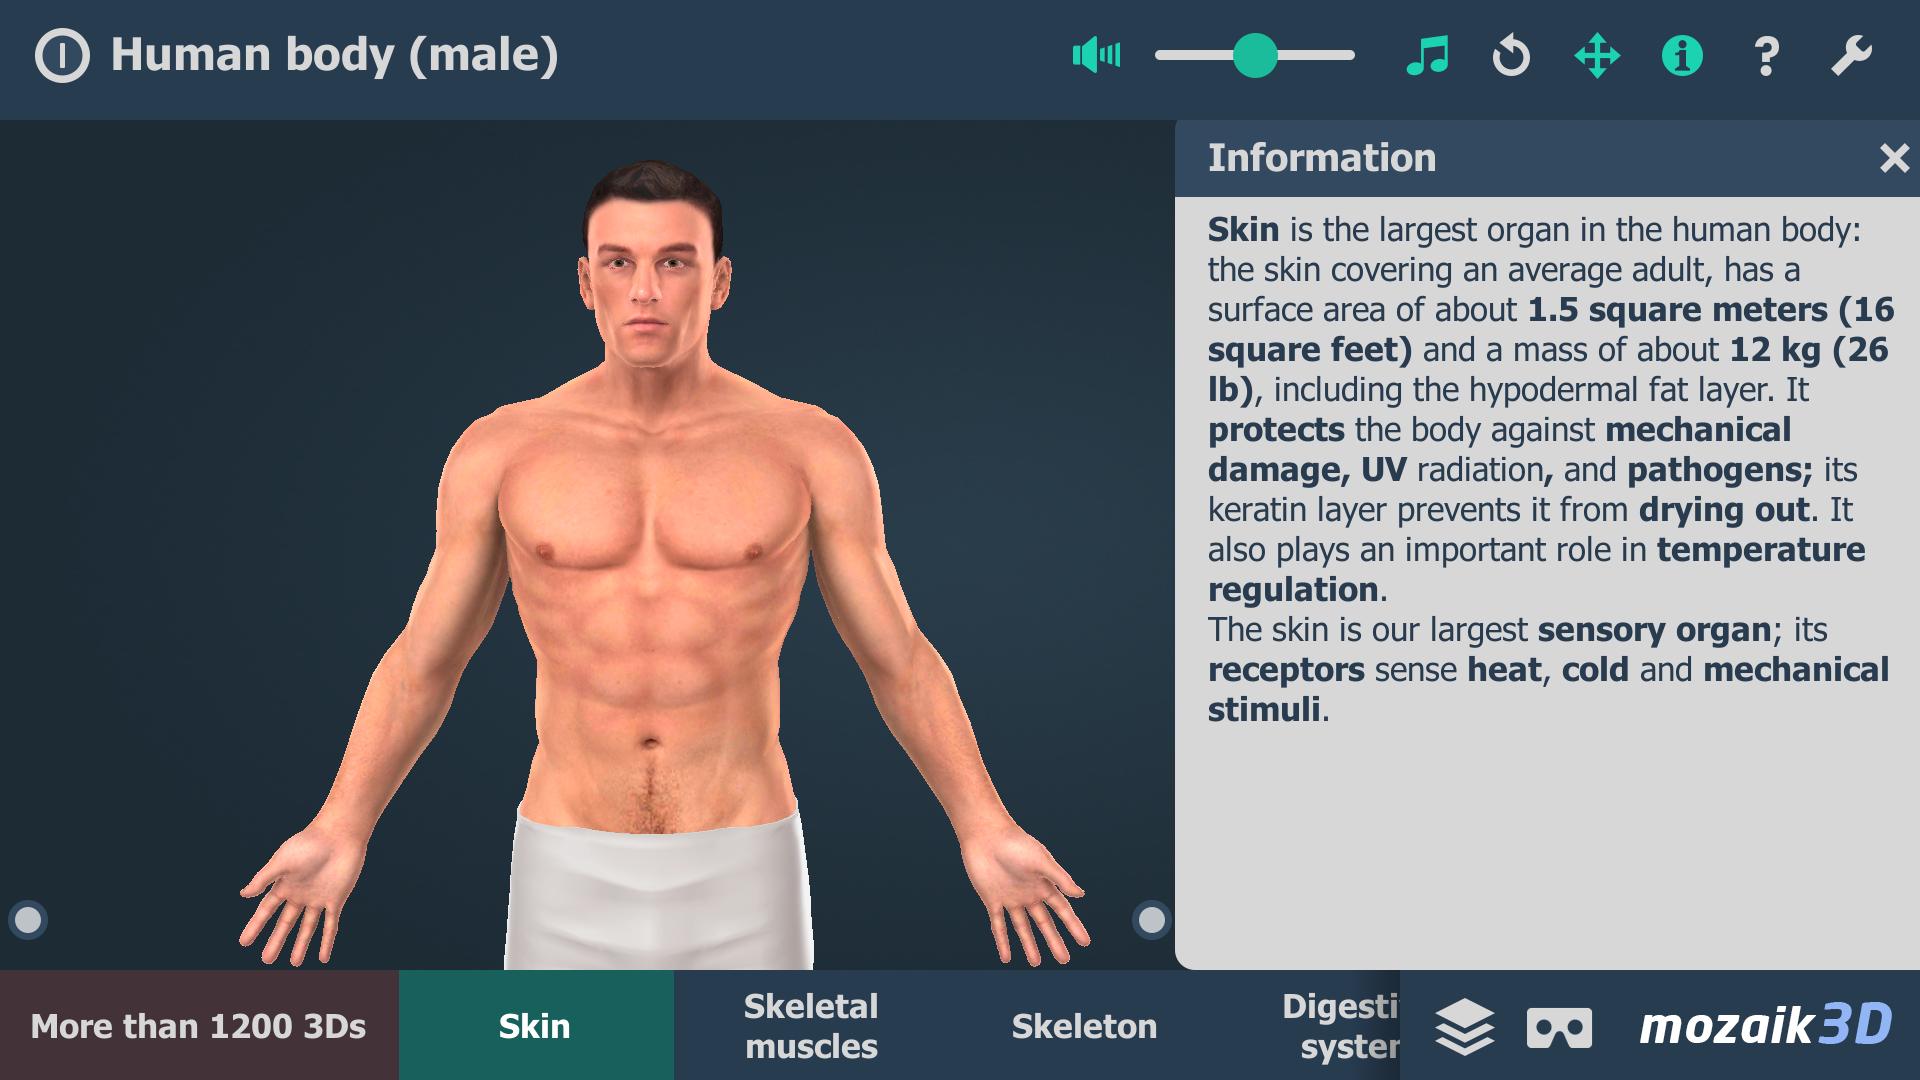 Human body (male) for Android - APK Download